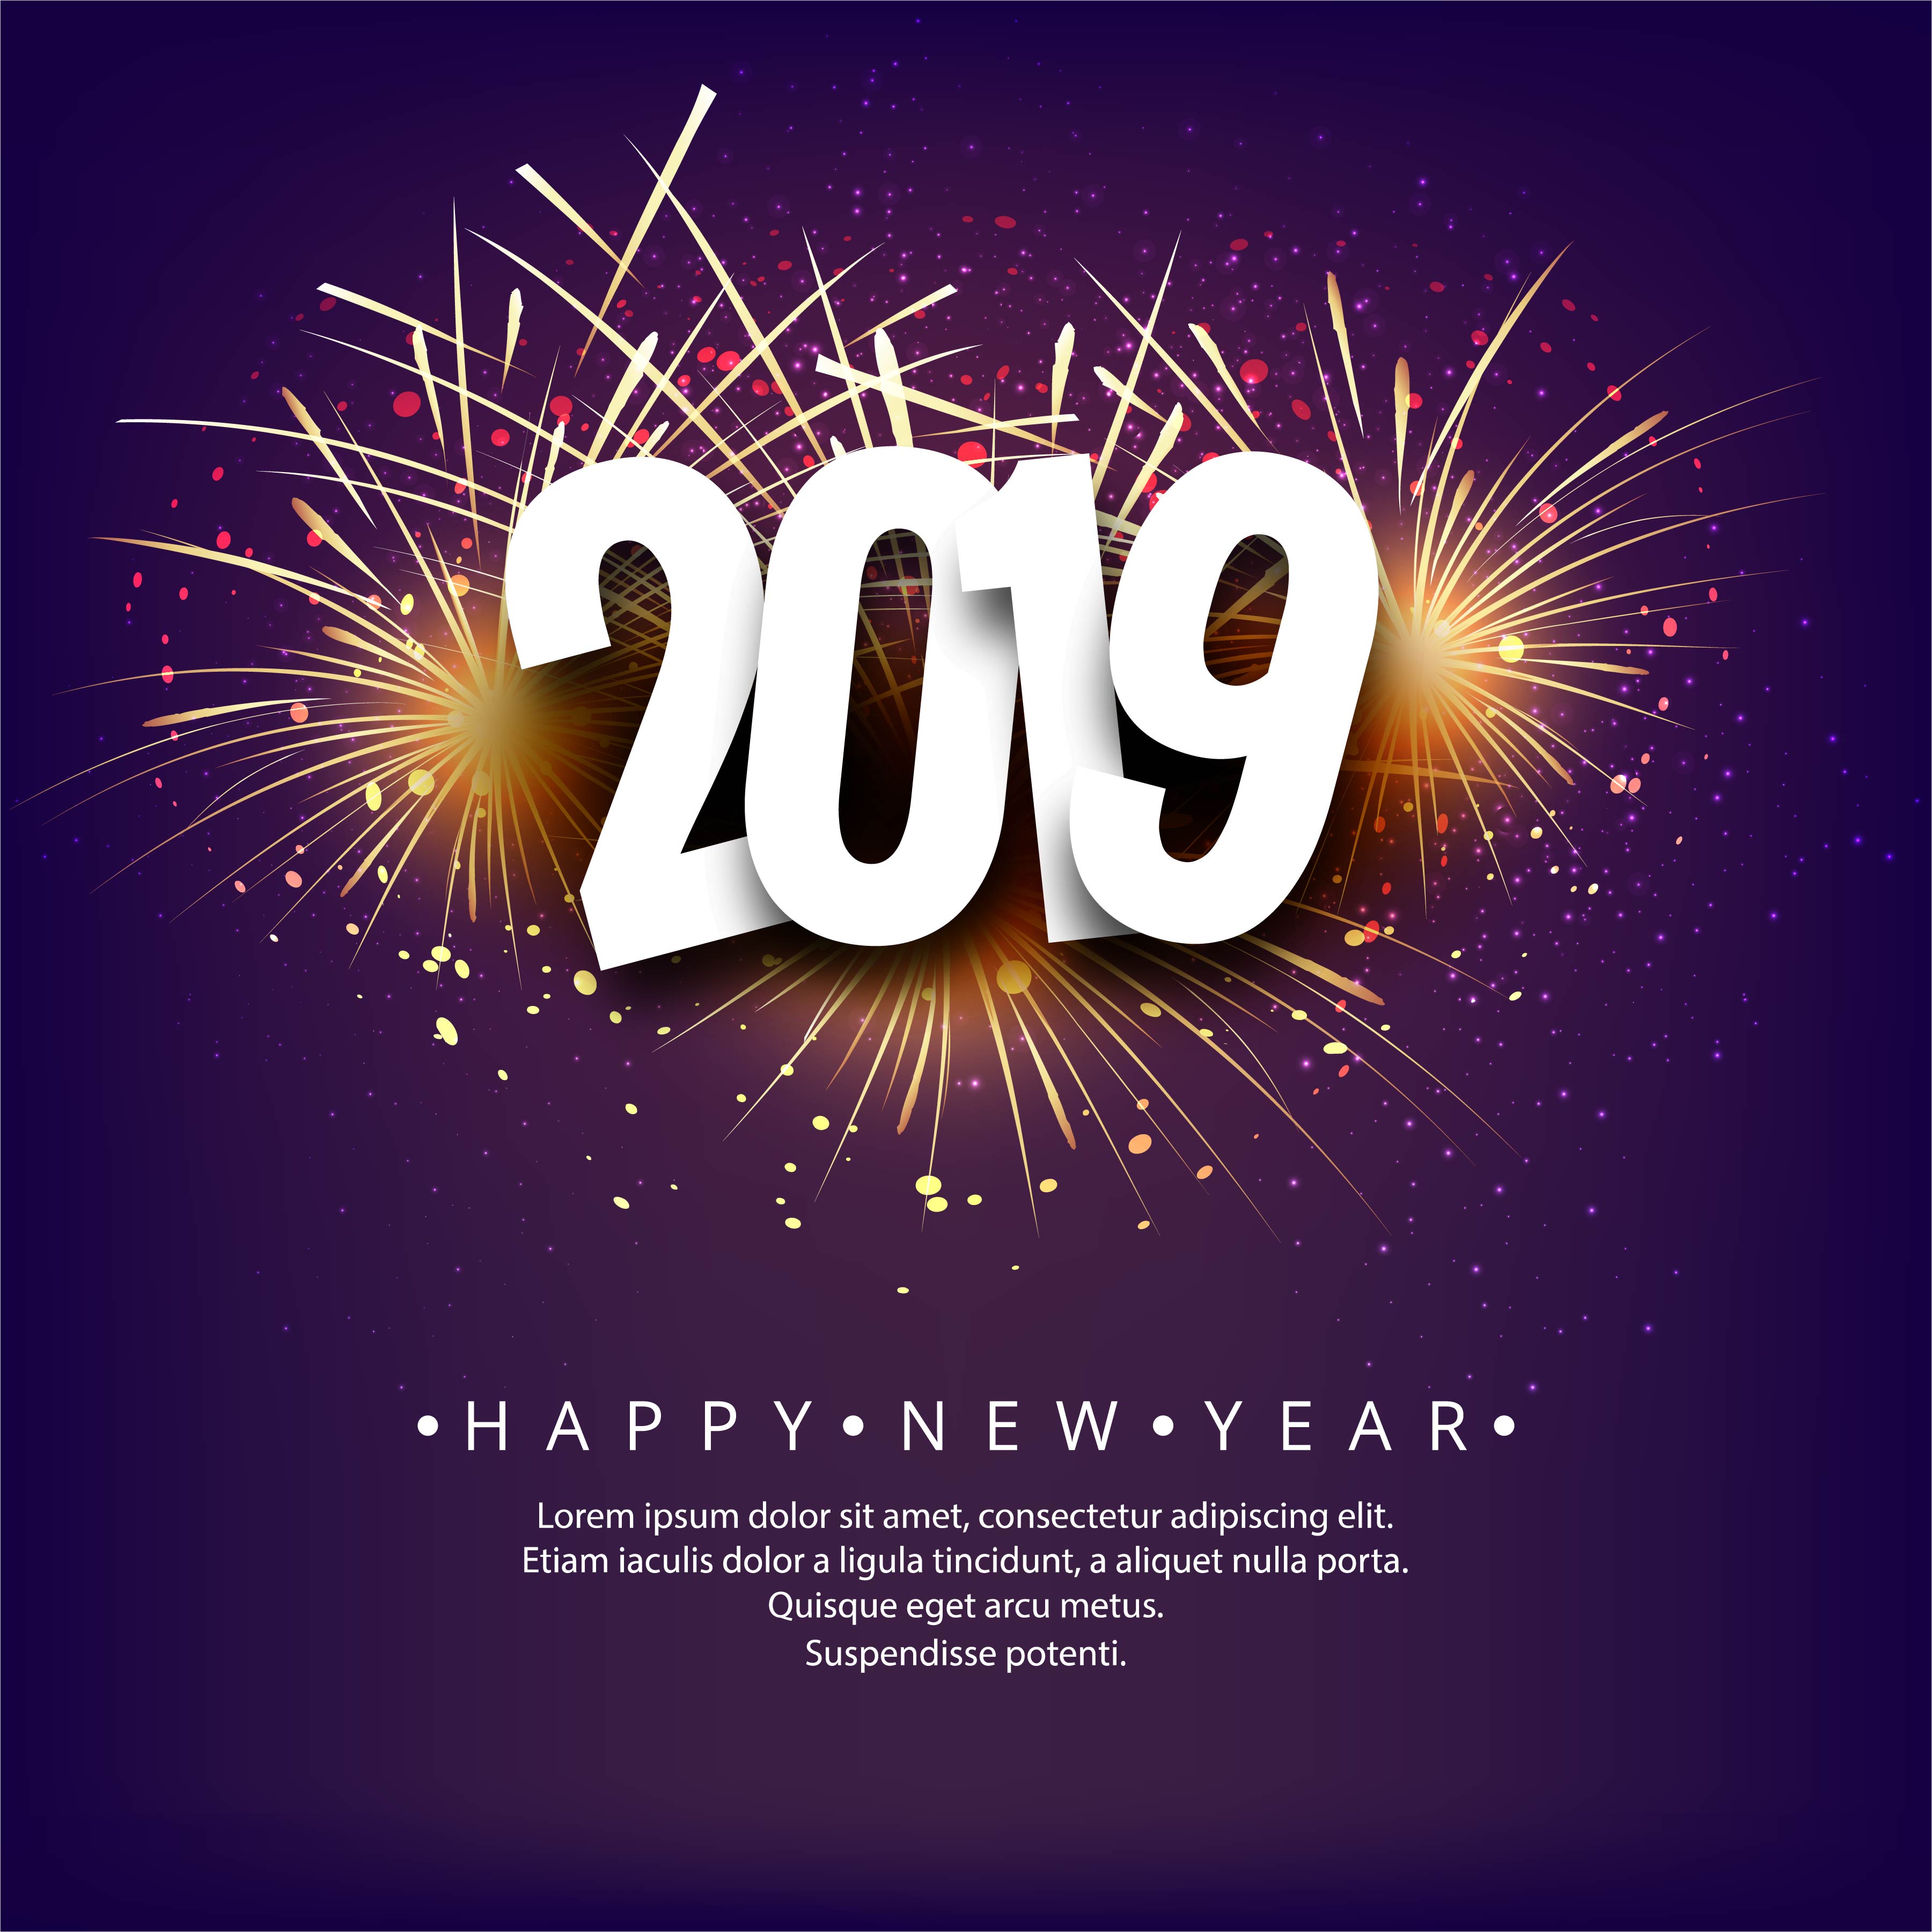 Happy New Year 2019 card celebration colorful background ...